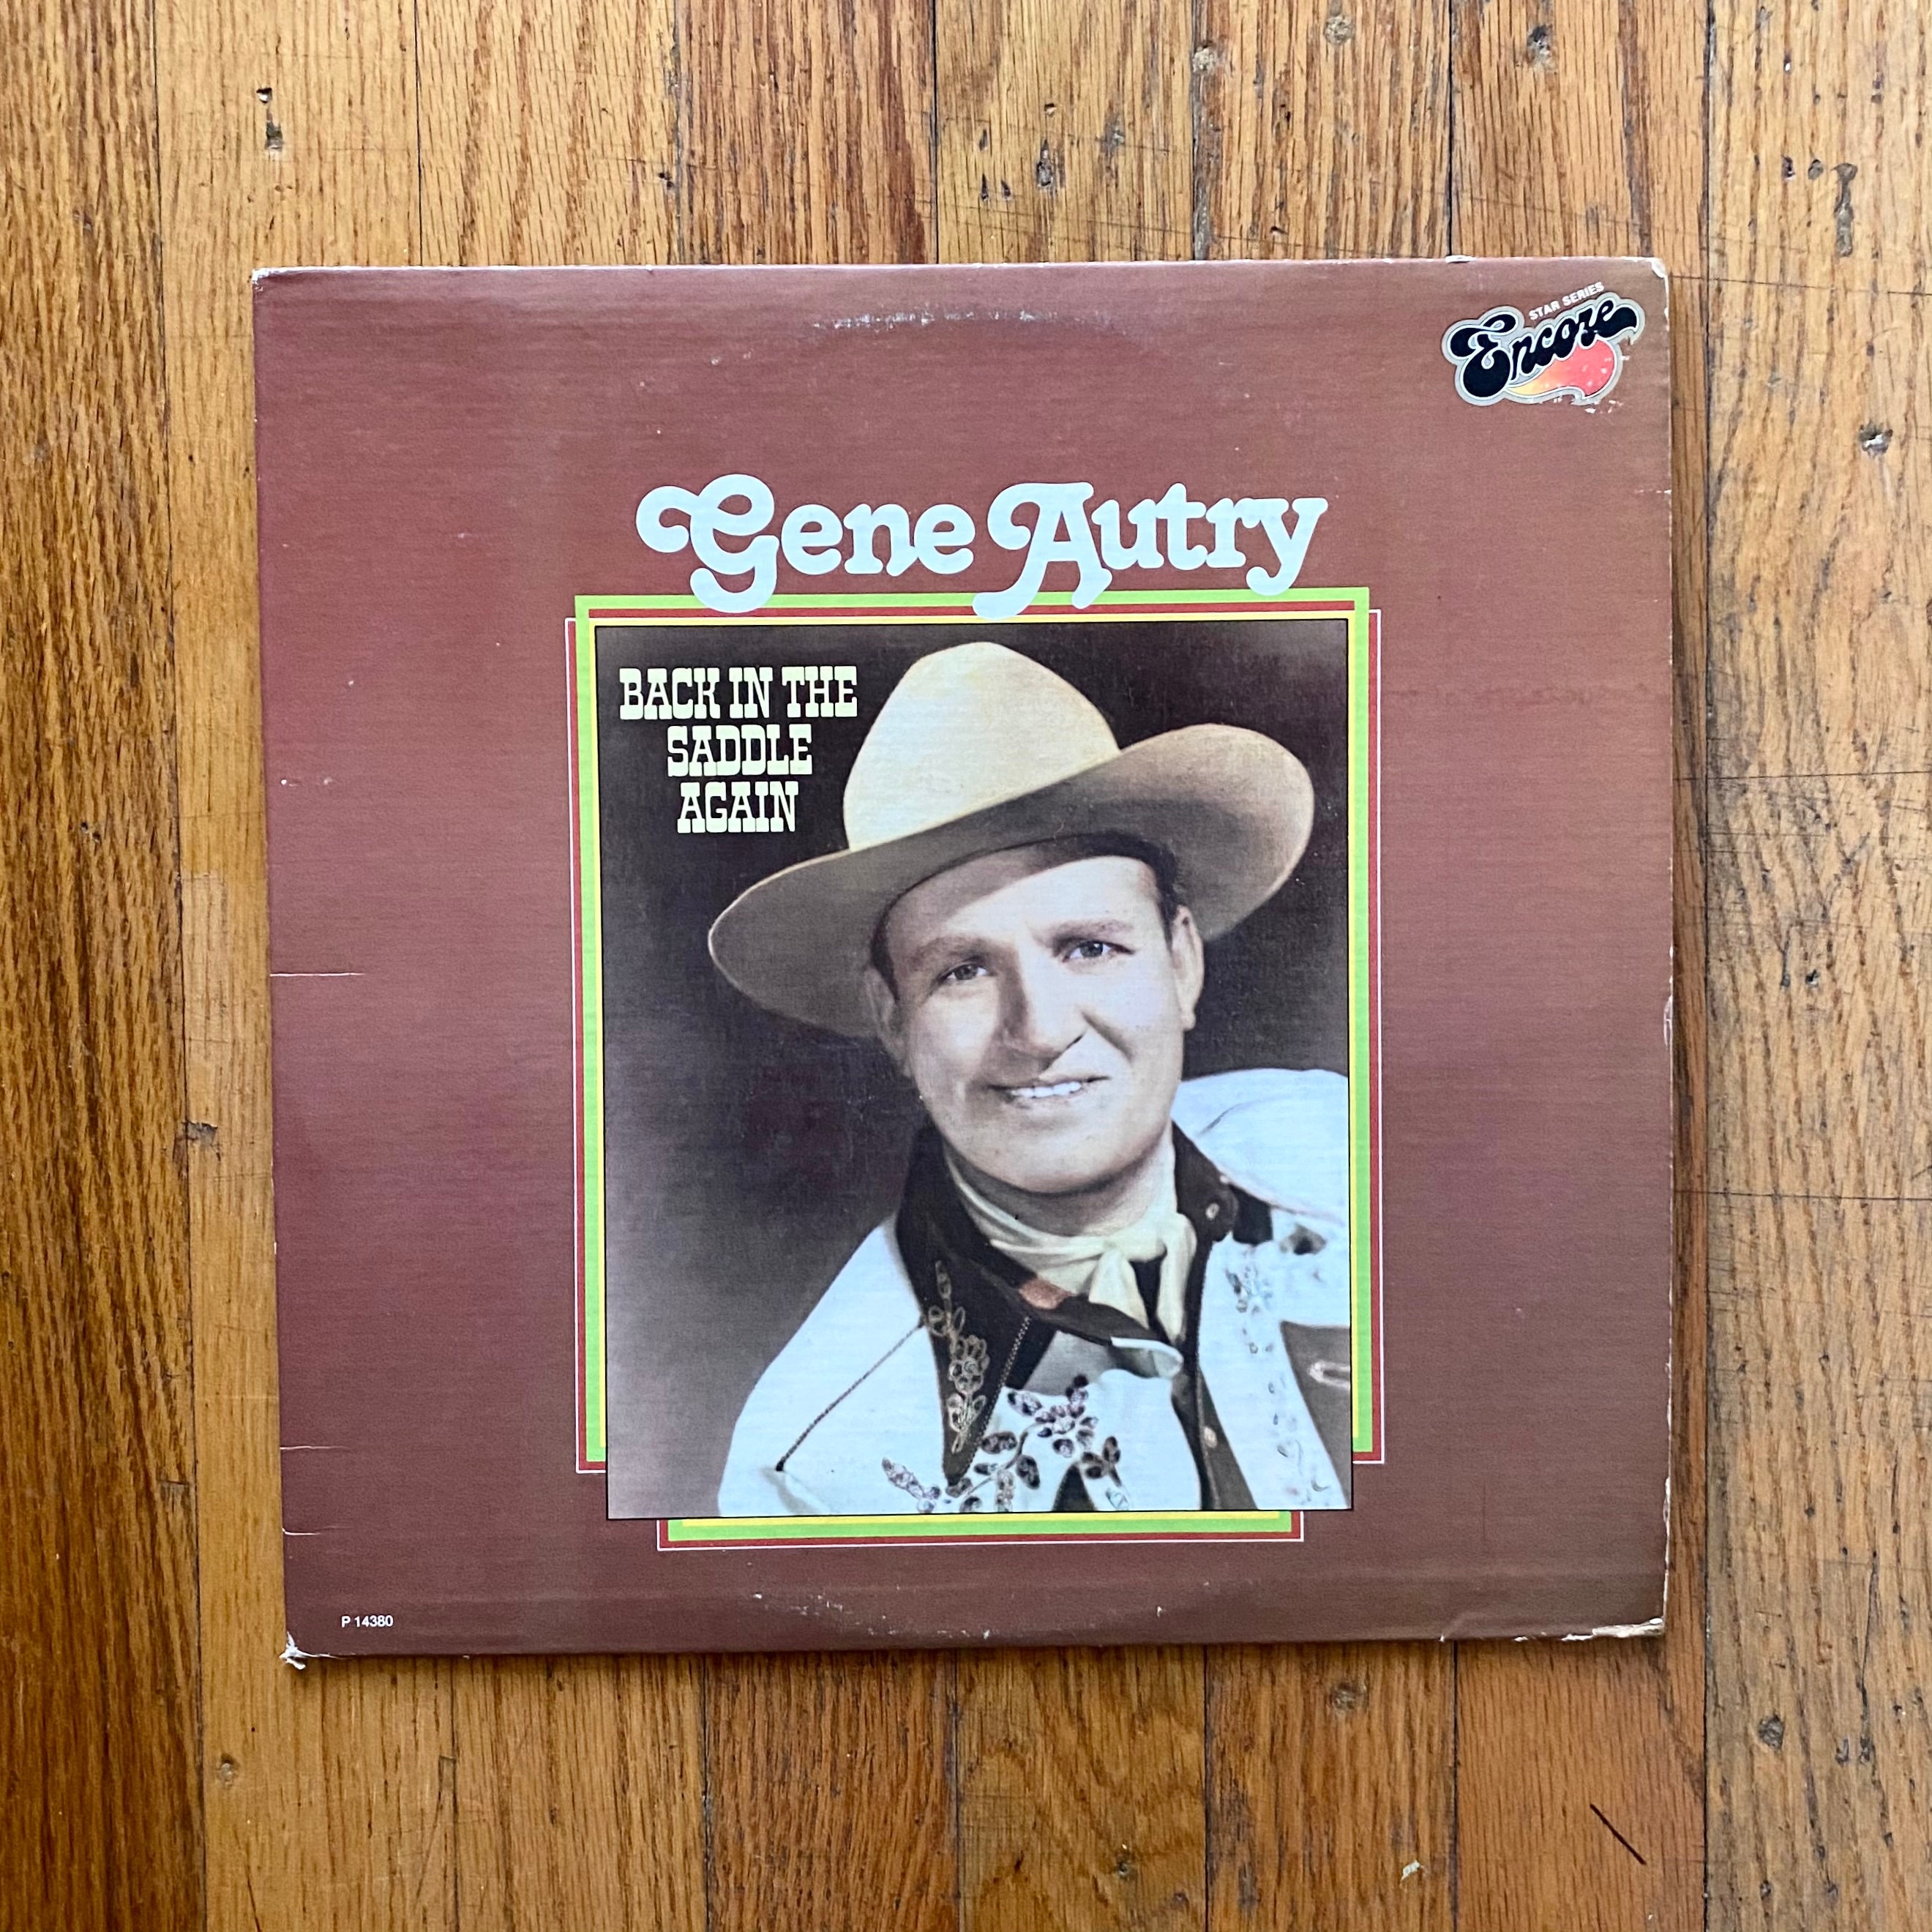 Gene Autry Vinyl Record Back in the Saddle Again 1979 | Etsy